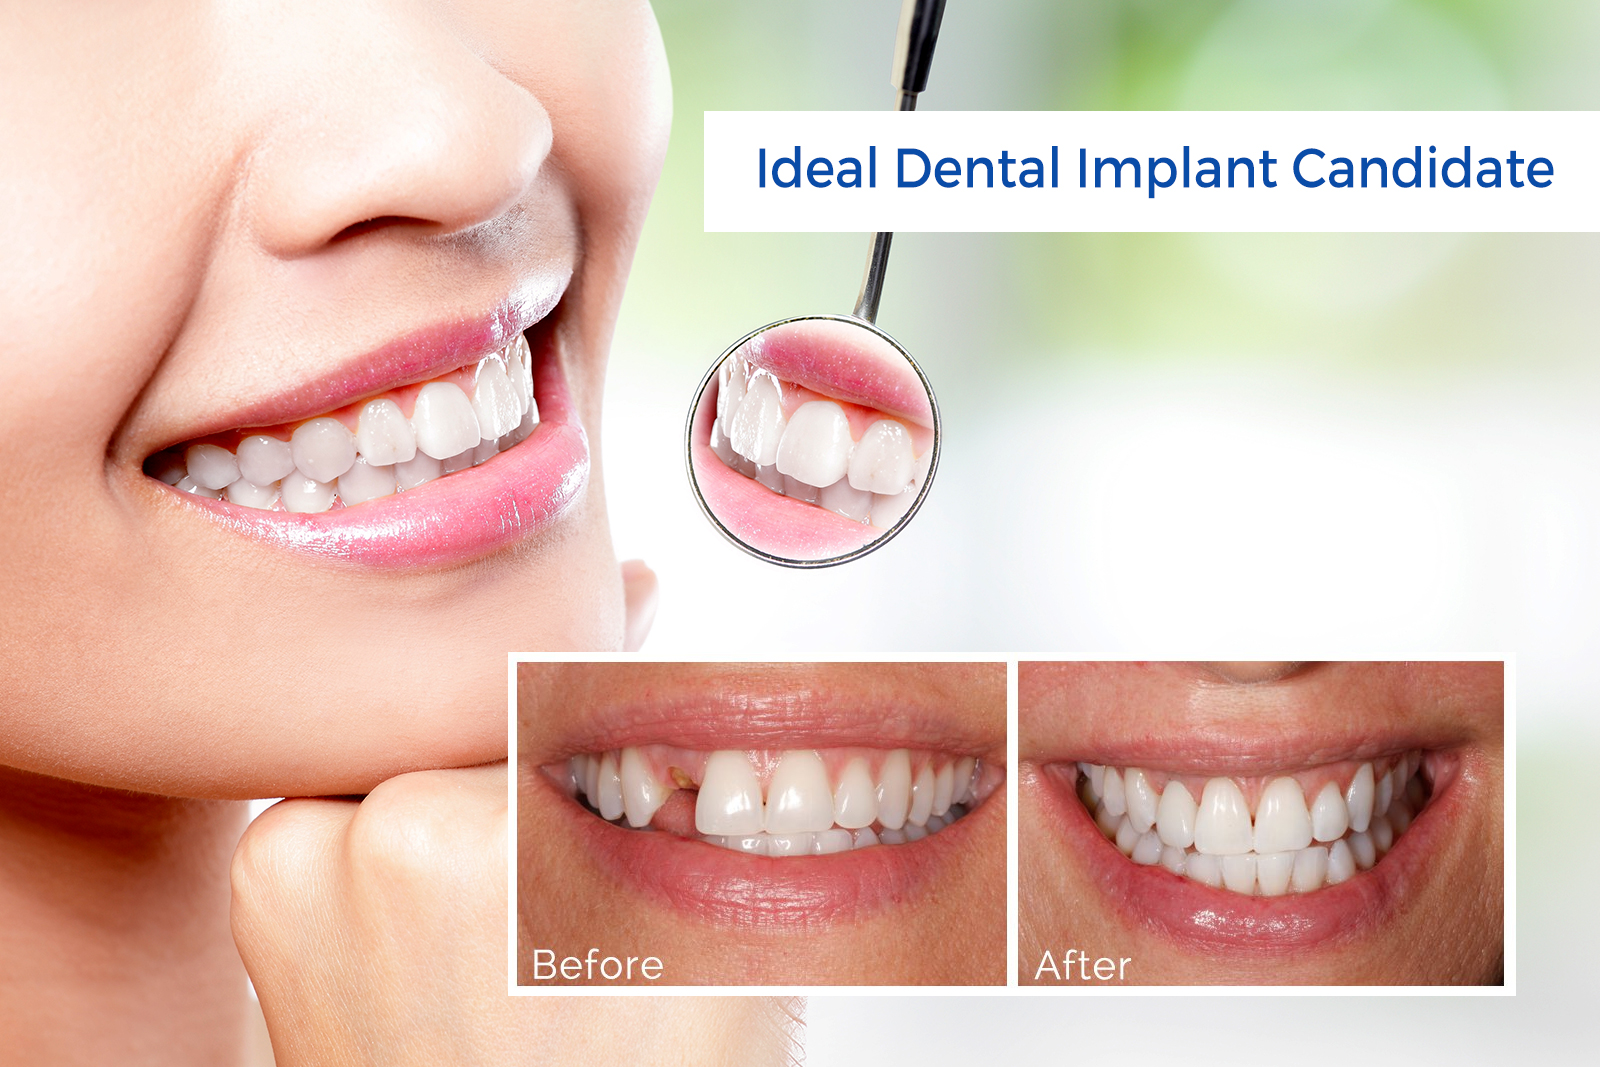 Does Your Dentist Suggest To Perform Dental Implants?